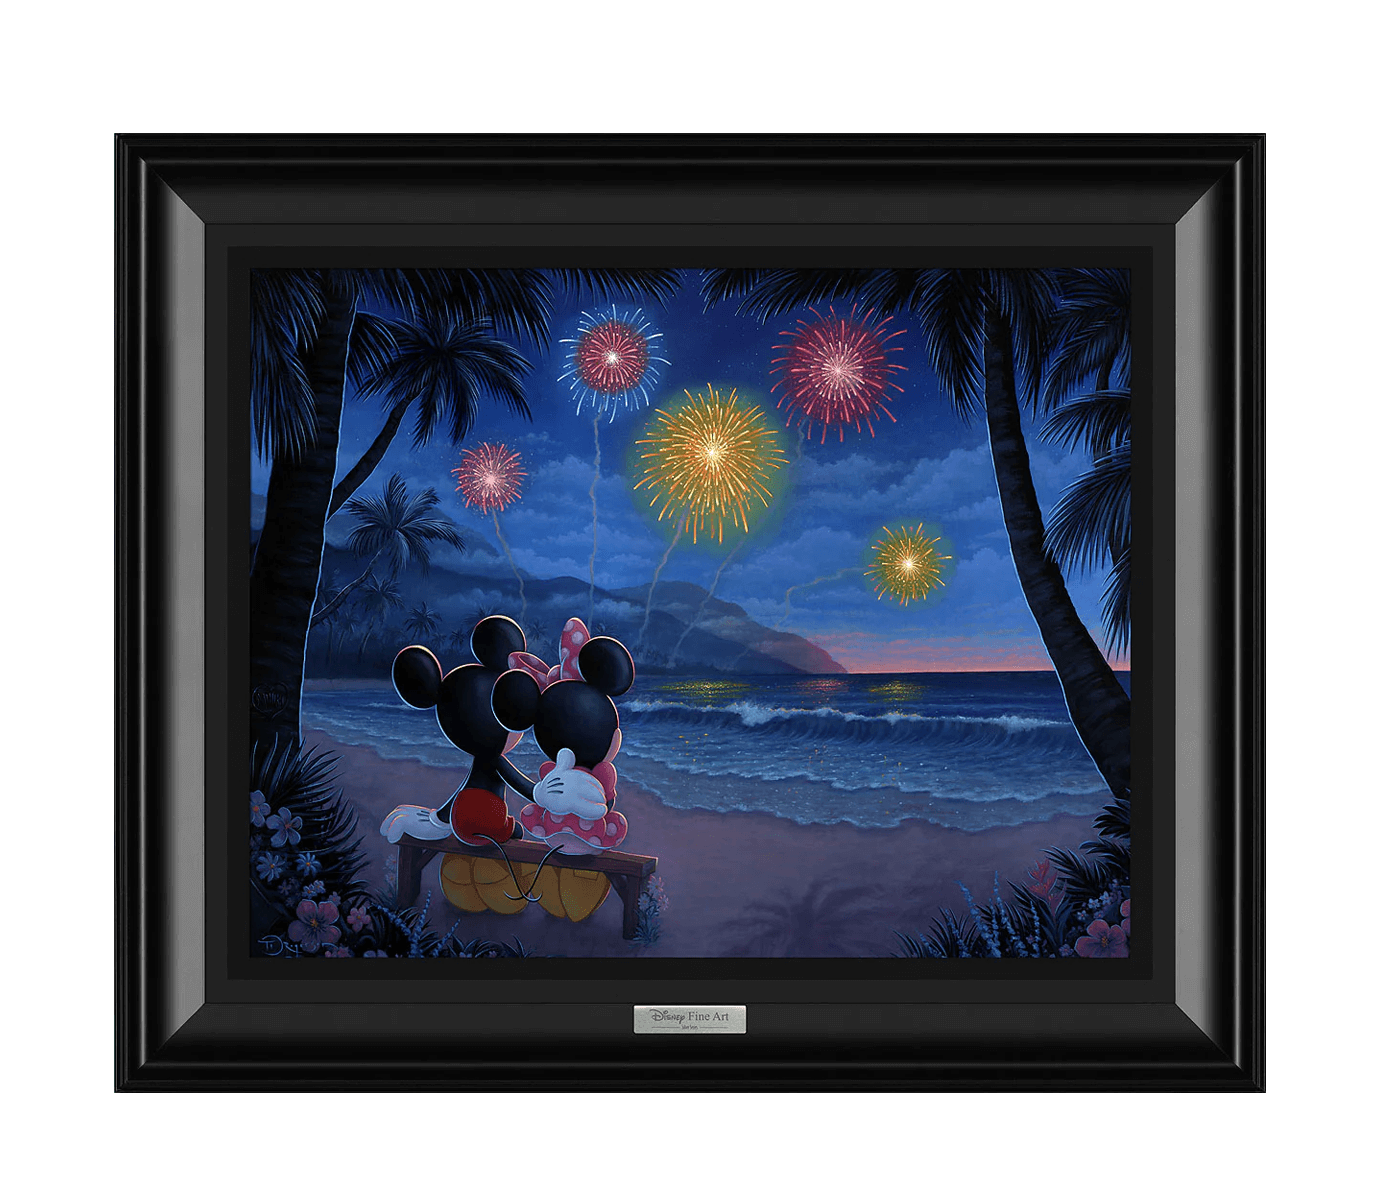 Shop Disney Paintings, Prints, and more